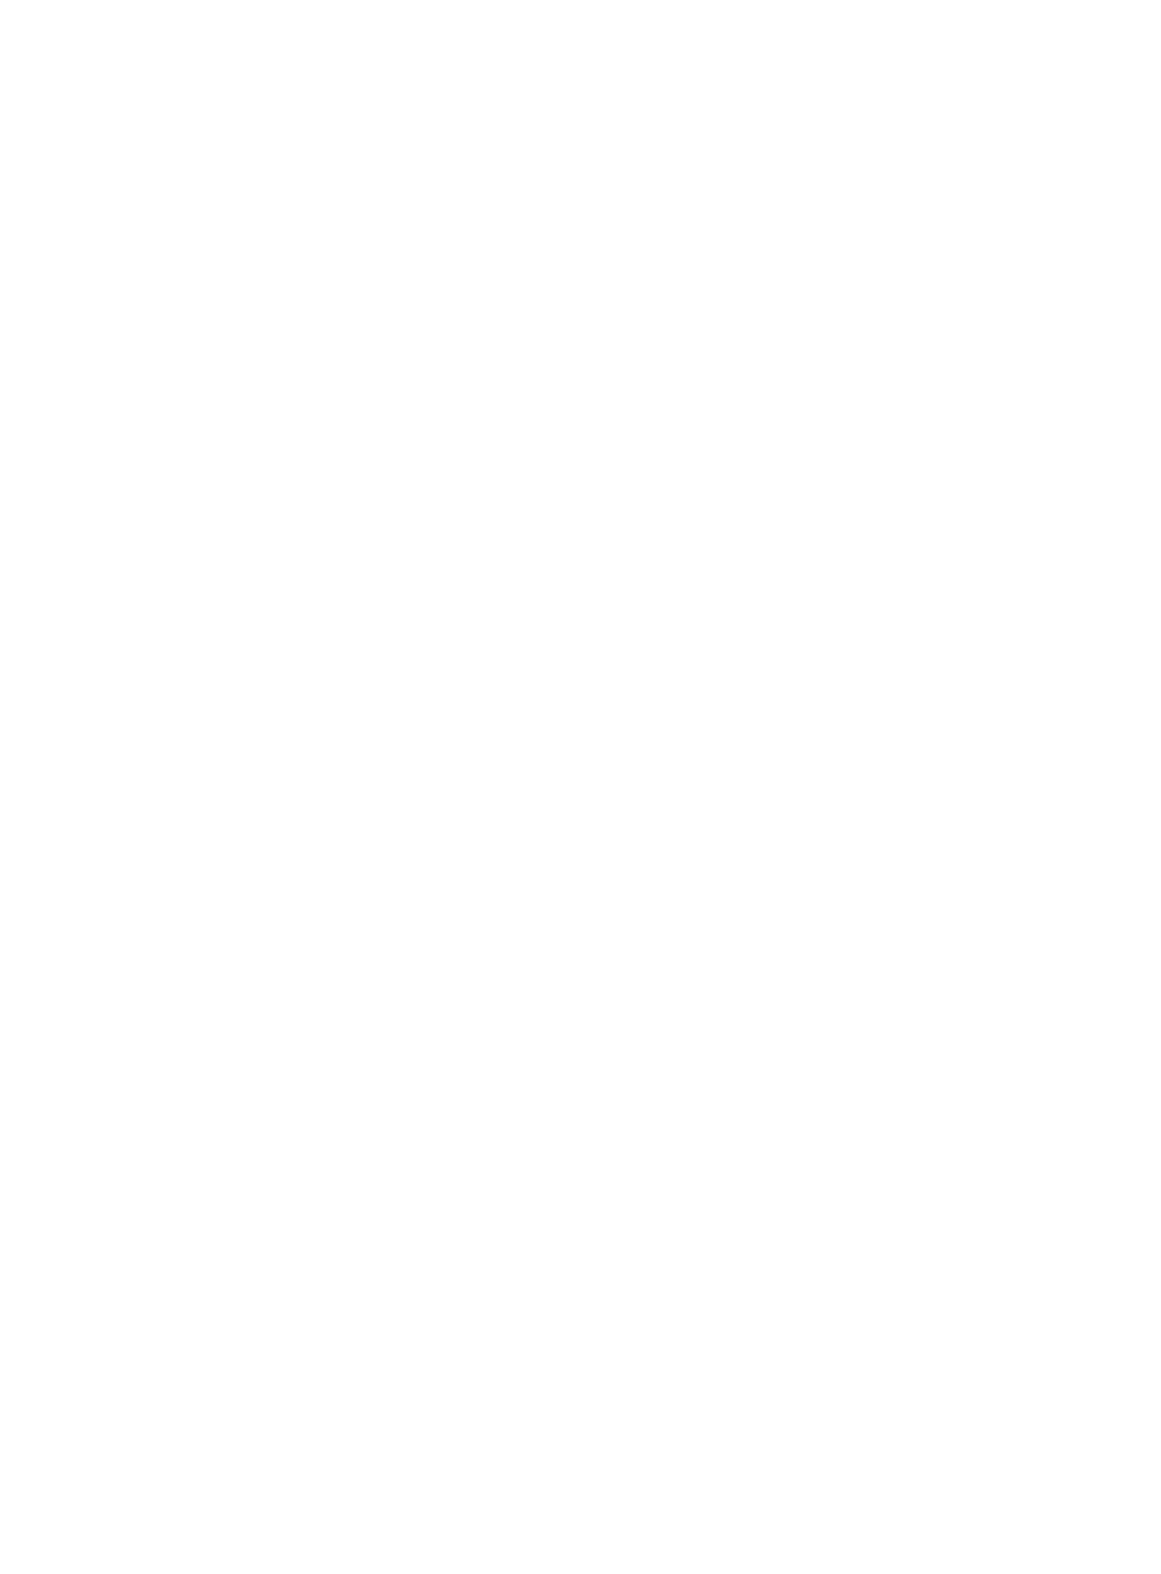 Naqi Water Company logo for dark backgrounds (transparent PNG)